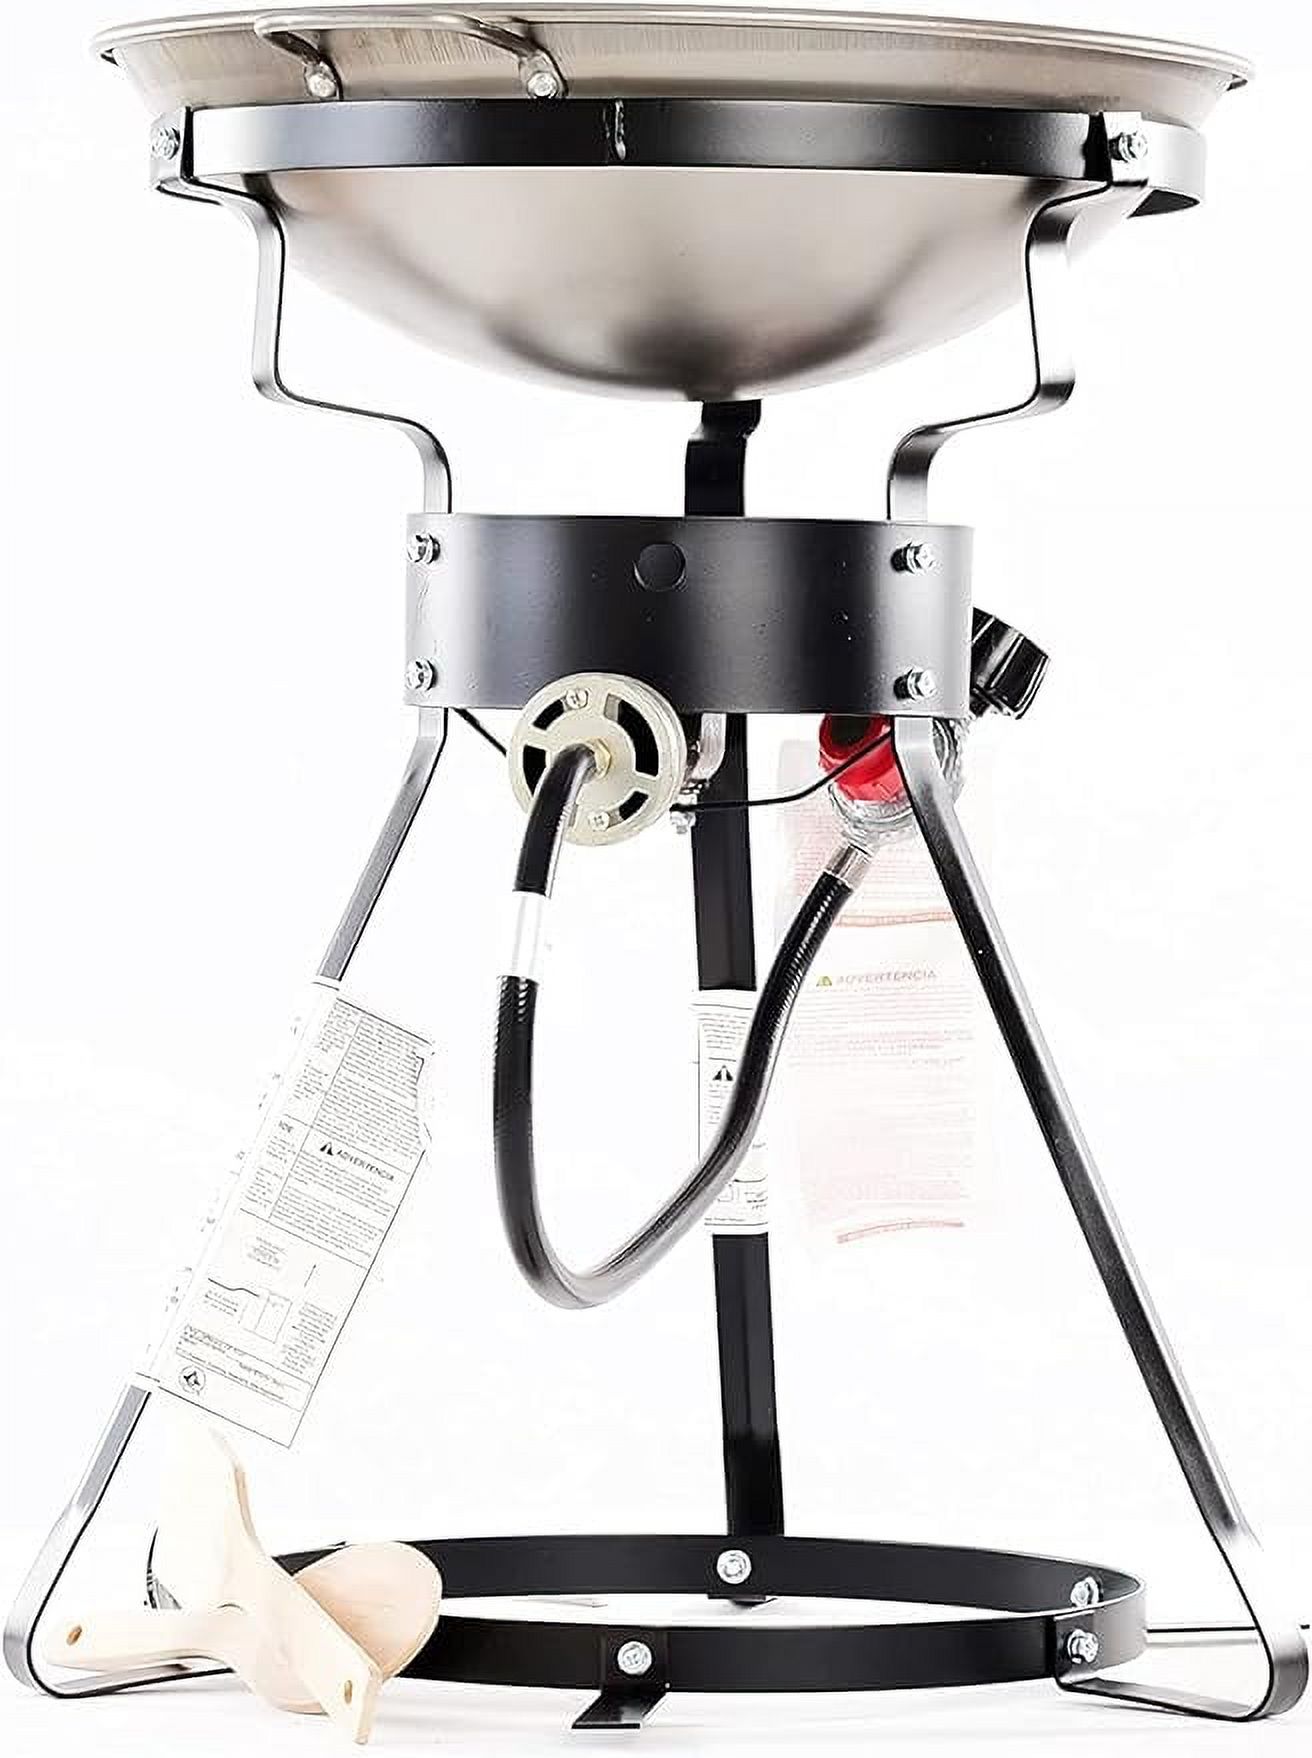 Pre-Owned King Kooker 24WC 12" Portable Propane Outdoor Cooker with Wok 24WC - Black (Fair) - image 4 of 5